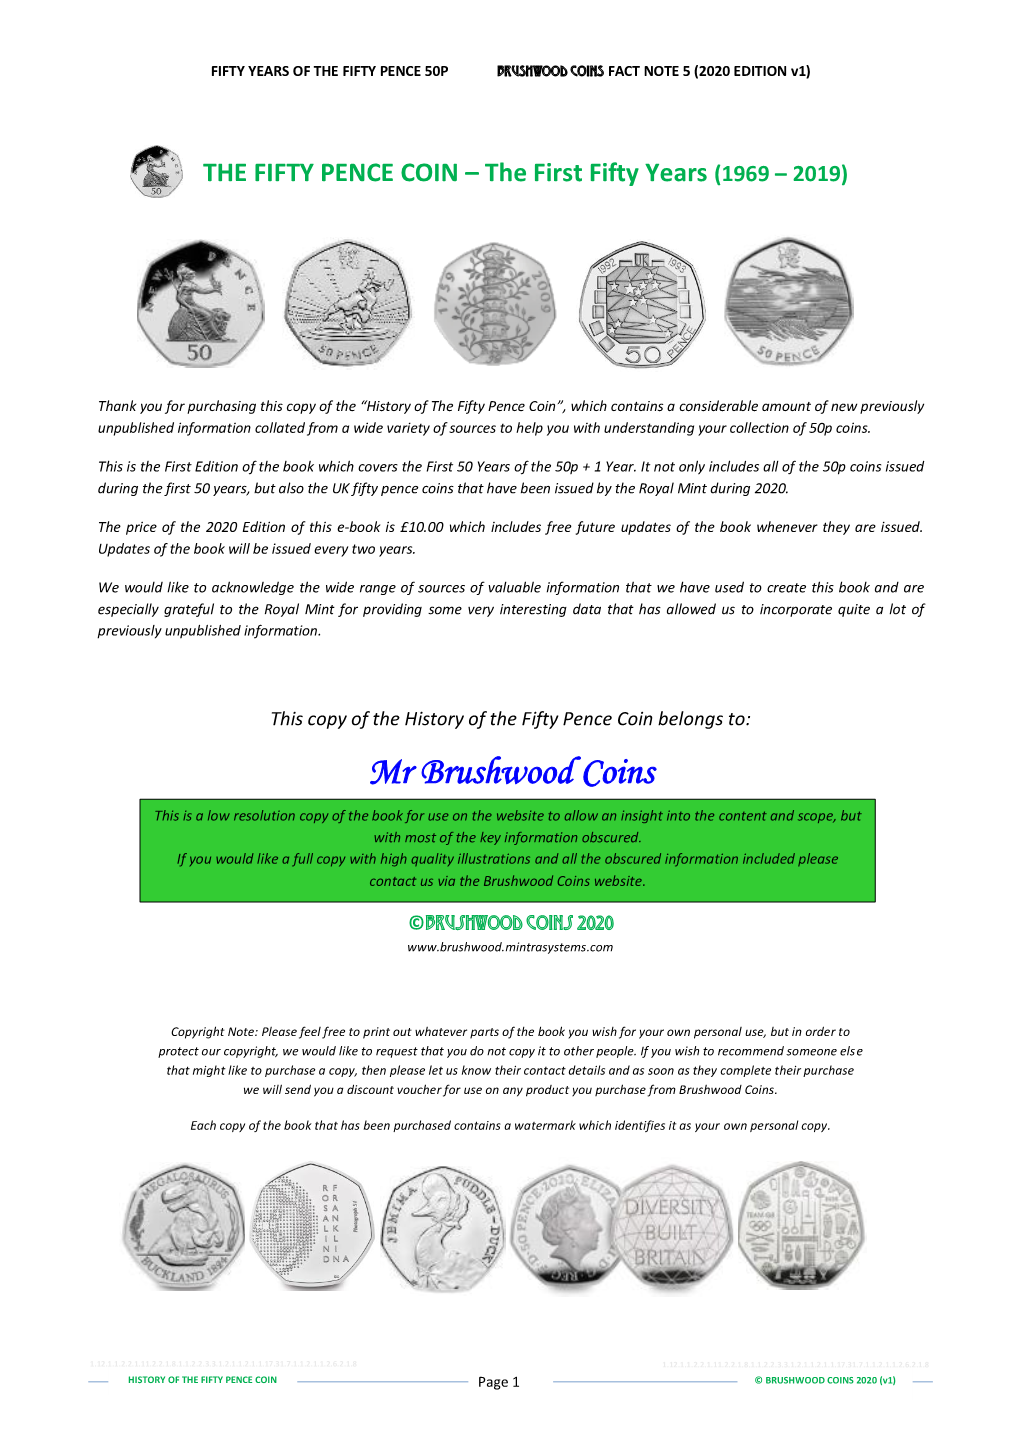 THE FIFTY PENCE COIN – the First Fifty Years (1969 – 2019)